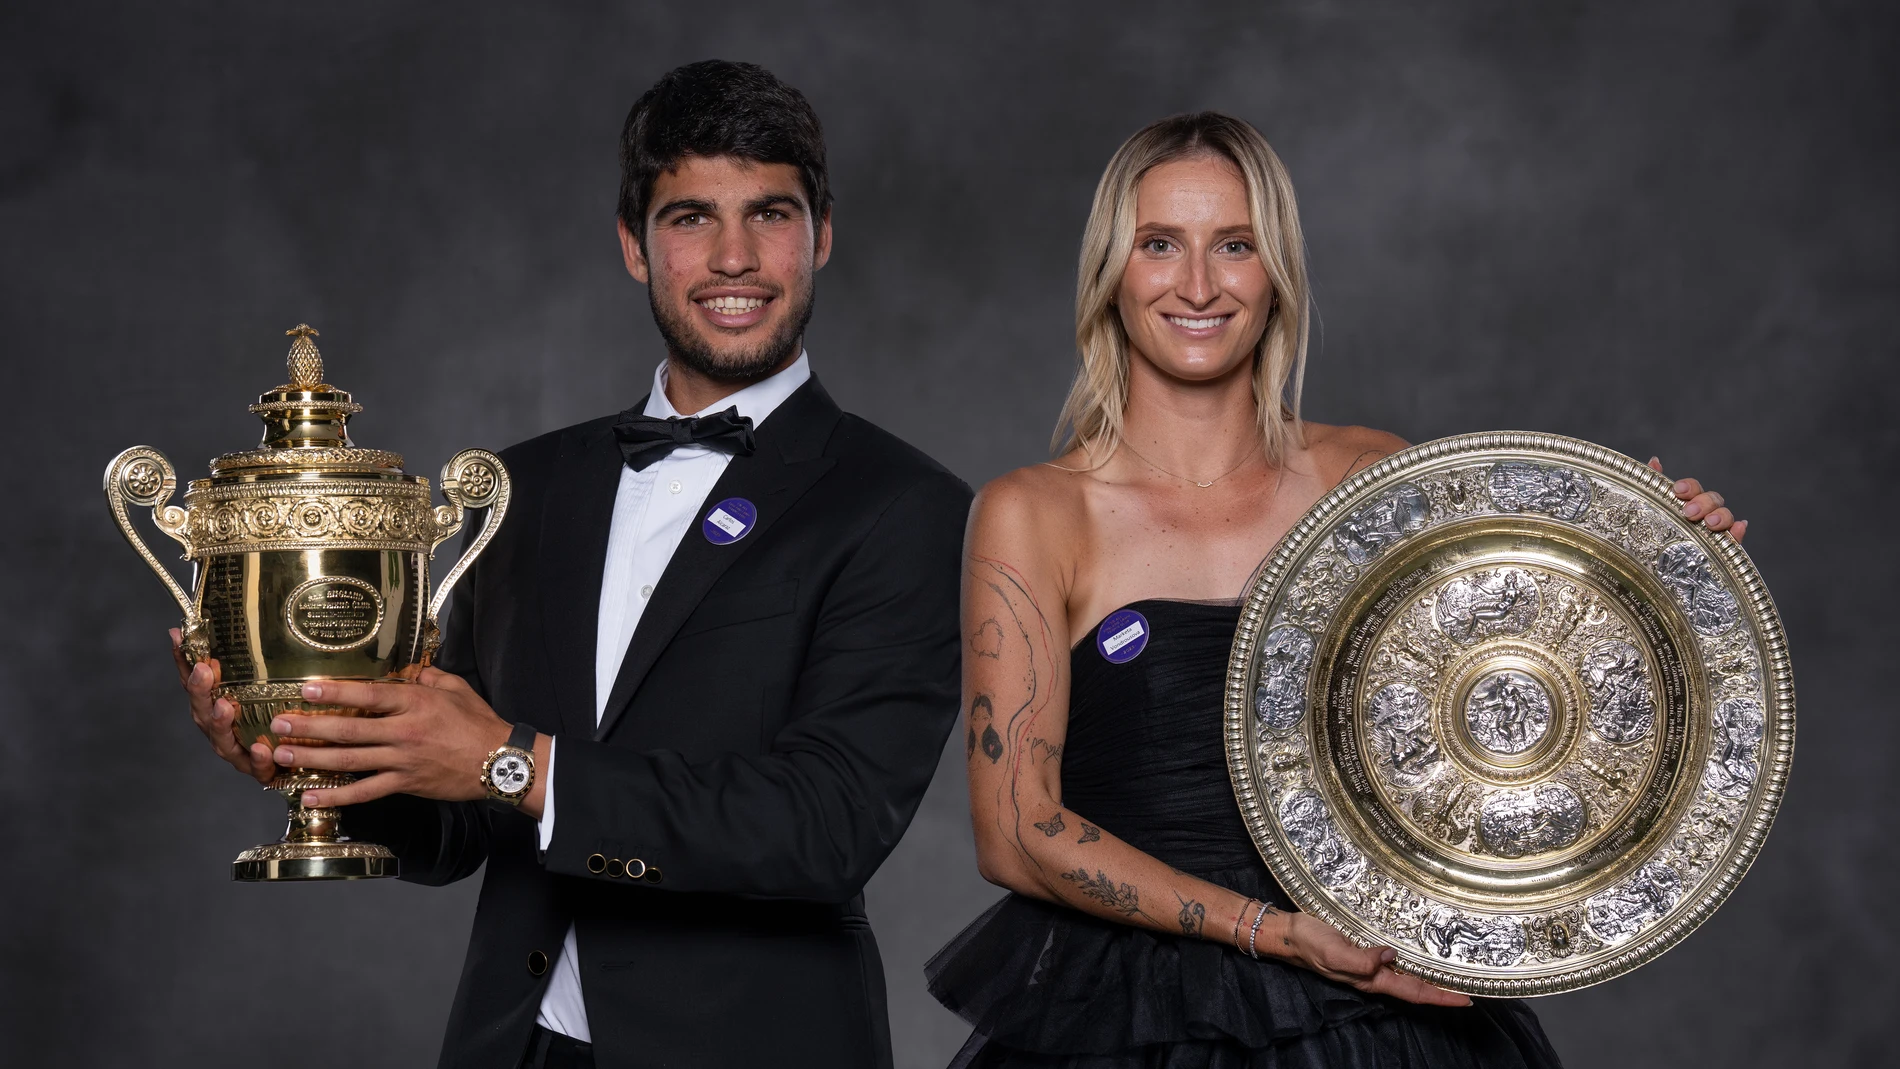 Wimbledon (United Kingdom), 16/07/2023.- A handout photo made available by the All England Lawn Tennis Club (AELTC) shows a composite image of Carlos Alcaraz of Spain with the Gentlemen's Singles Trophy and Marketa Vondrousova of Czech Republic with the Venus Rosewater Dish at the Champions Dinner, in Wimbledon, Britain, 16 July 2023. (Tenis, República Checa, España, Reino Unido) EFE/EPA/AELTC/Thomas Lovelock HANDOUT HANDOUT EDITORIAL USE ONLY/NO SALES